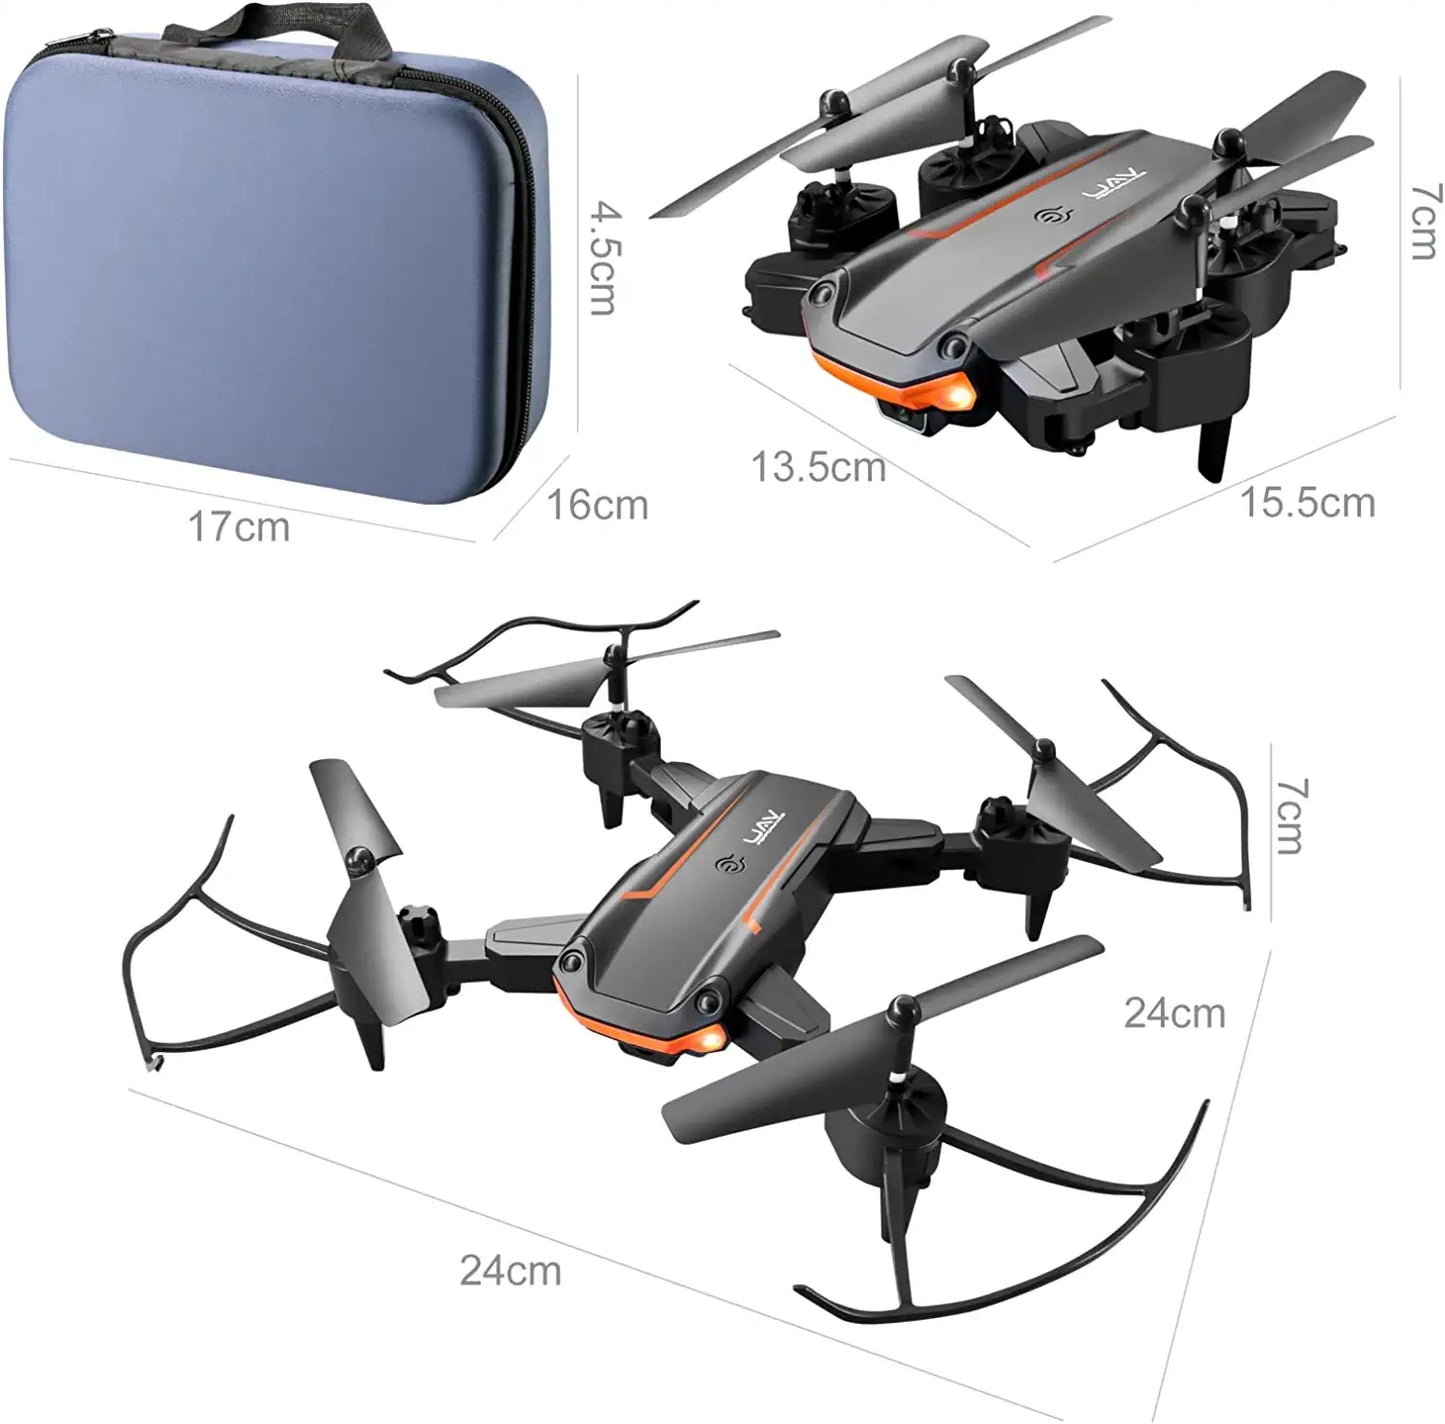 TBBKing AE86/KY603 Drones - with camera for adults 1080P Drone with Camera RC Drones for Adult Live Video FPV Optical Flow Positioning Profesional Quadcopter Mini Drone for Kids RC Helicopter Boys Toys - RCDrone